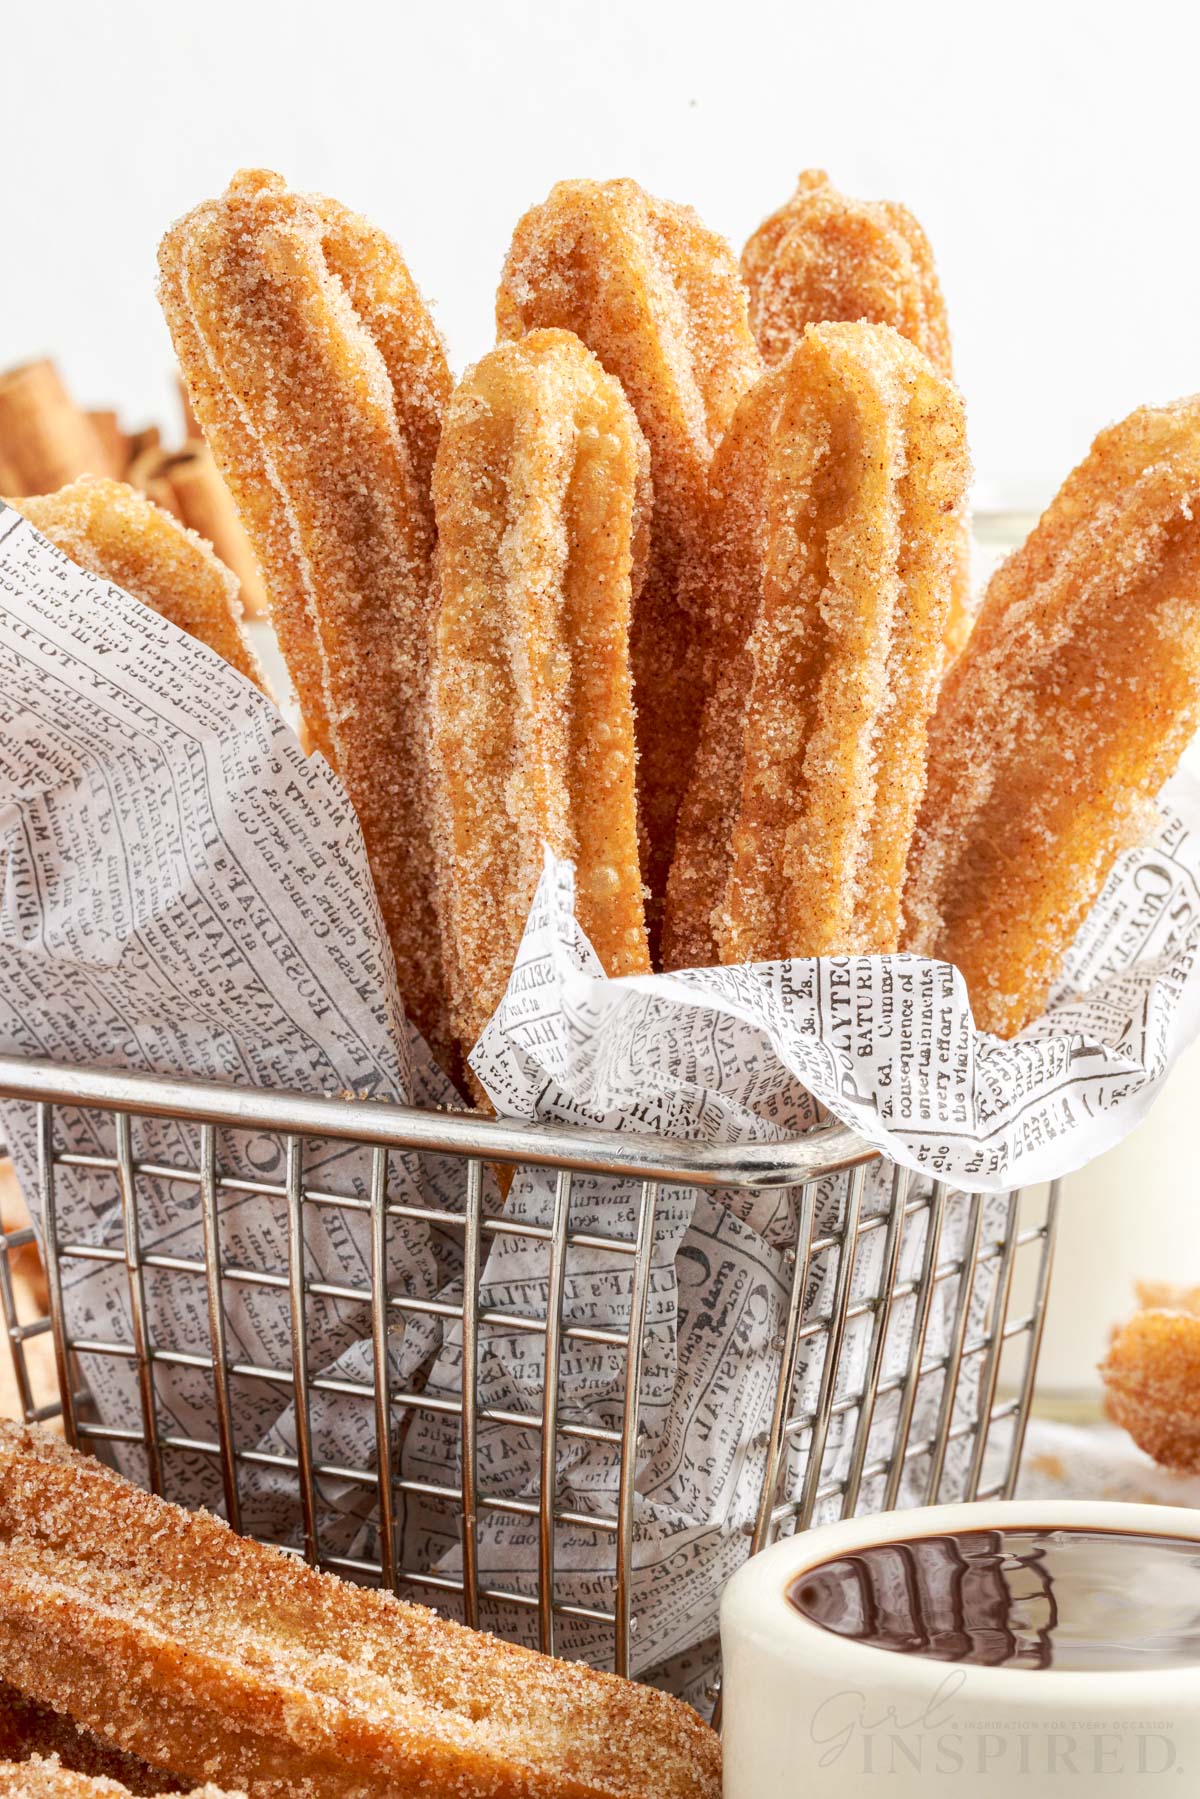 Front close up of Churros in a lined metal basket.